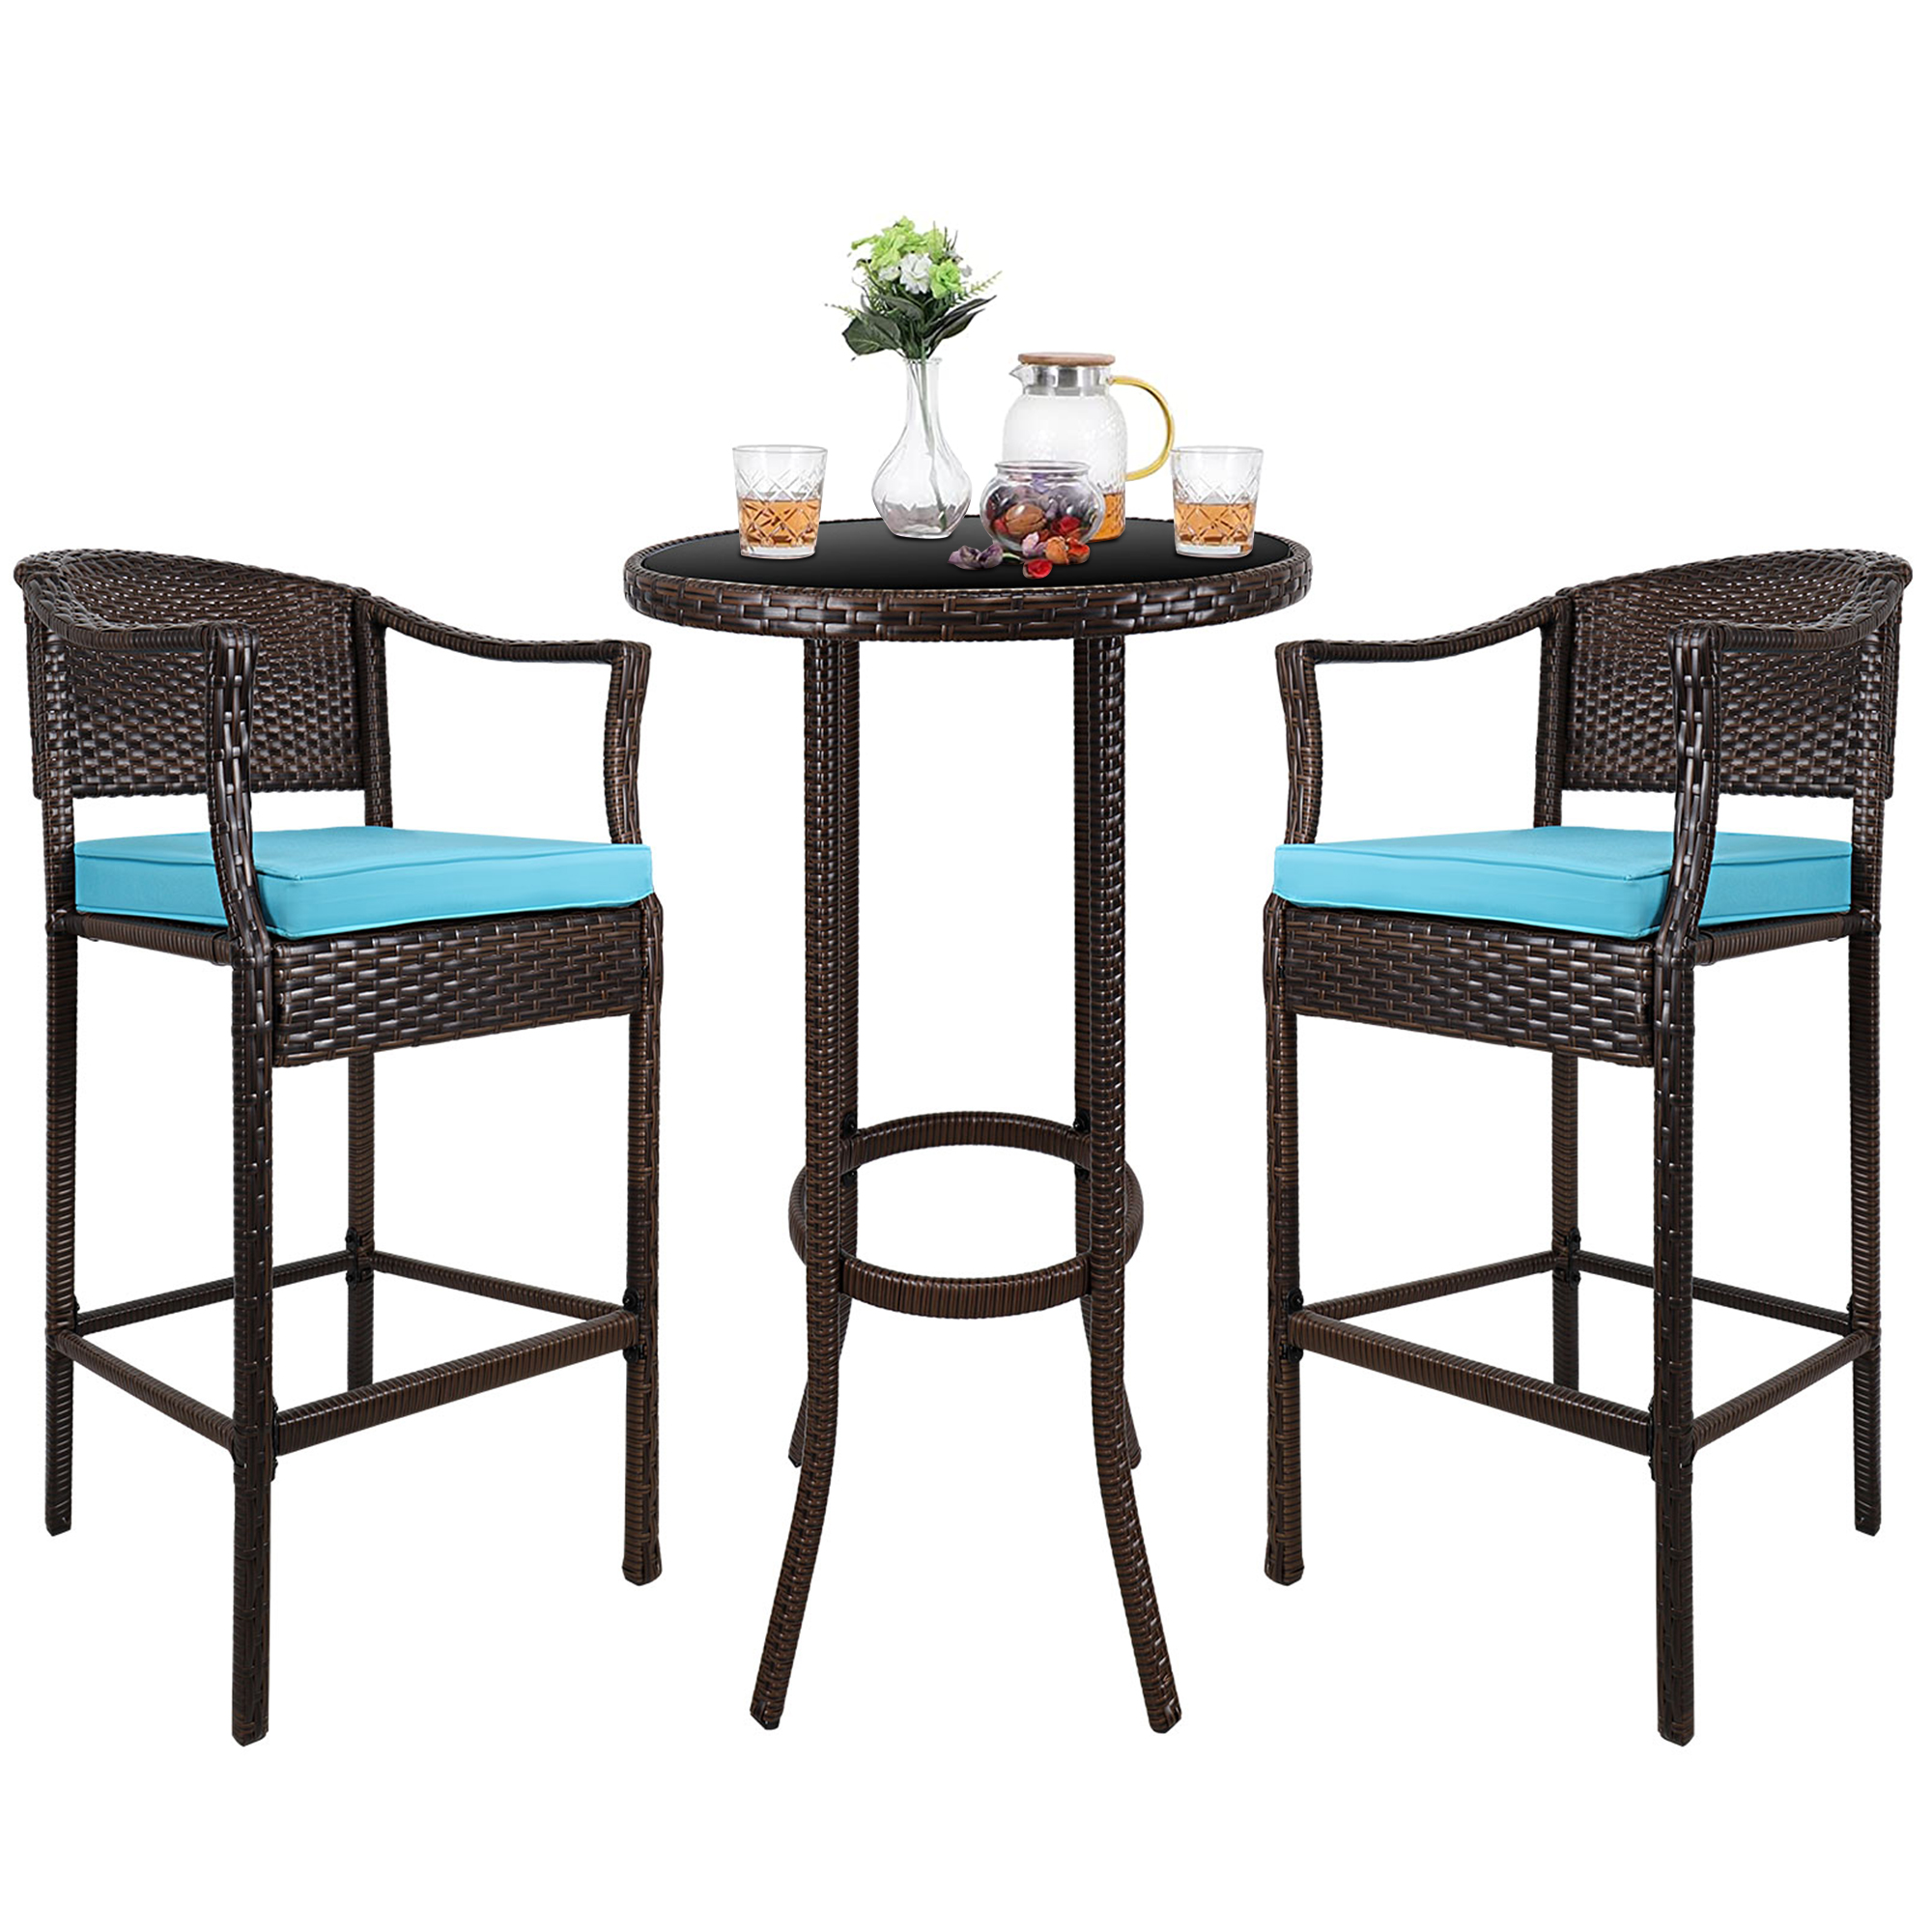 3 Piece Patio Height Bar Set with Table and Chairs, Outdoor Bistro Set, 27.56" Bistro Dining Table and 2 Cushioned Chairs, Patio Furniture Sets Suitable for Yard, Balcony, Garden, and Pool, B15 - image 1 of 10